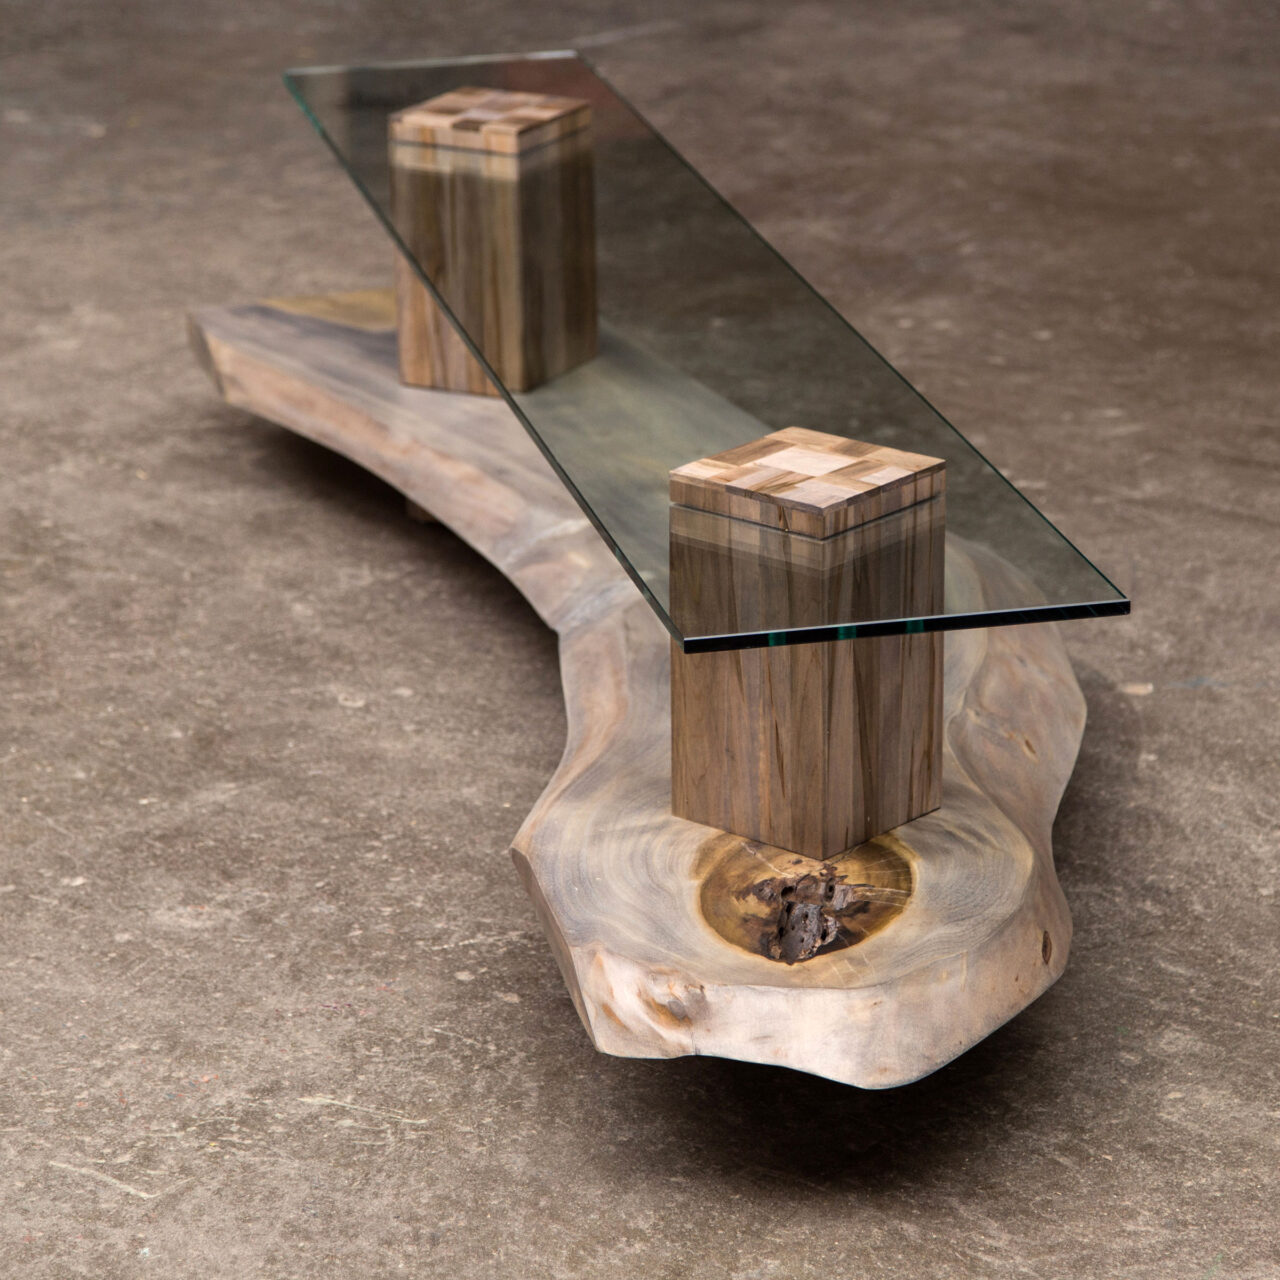 A unique luxury console table by SENTIENT, Foothills, combining a live-edge wood slab and a marble slab with a clear glass top, placed on geometric walnut pedestals on a sidewalk.